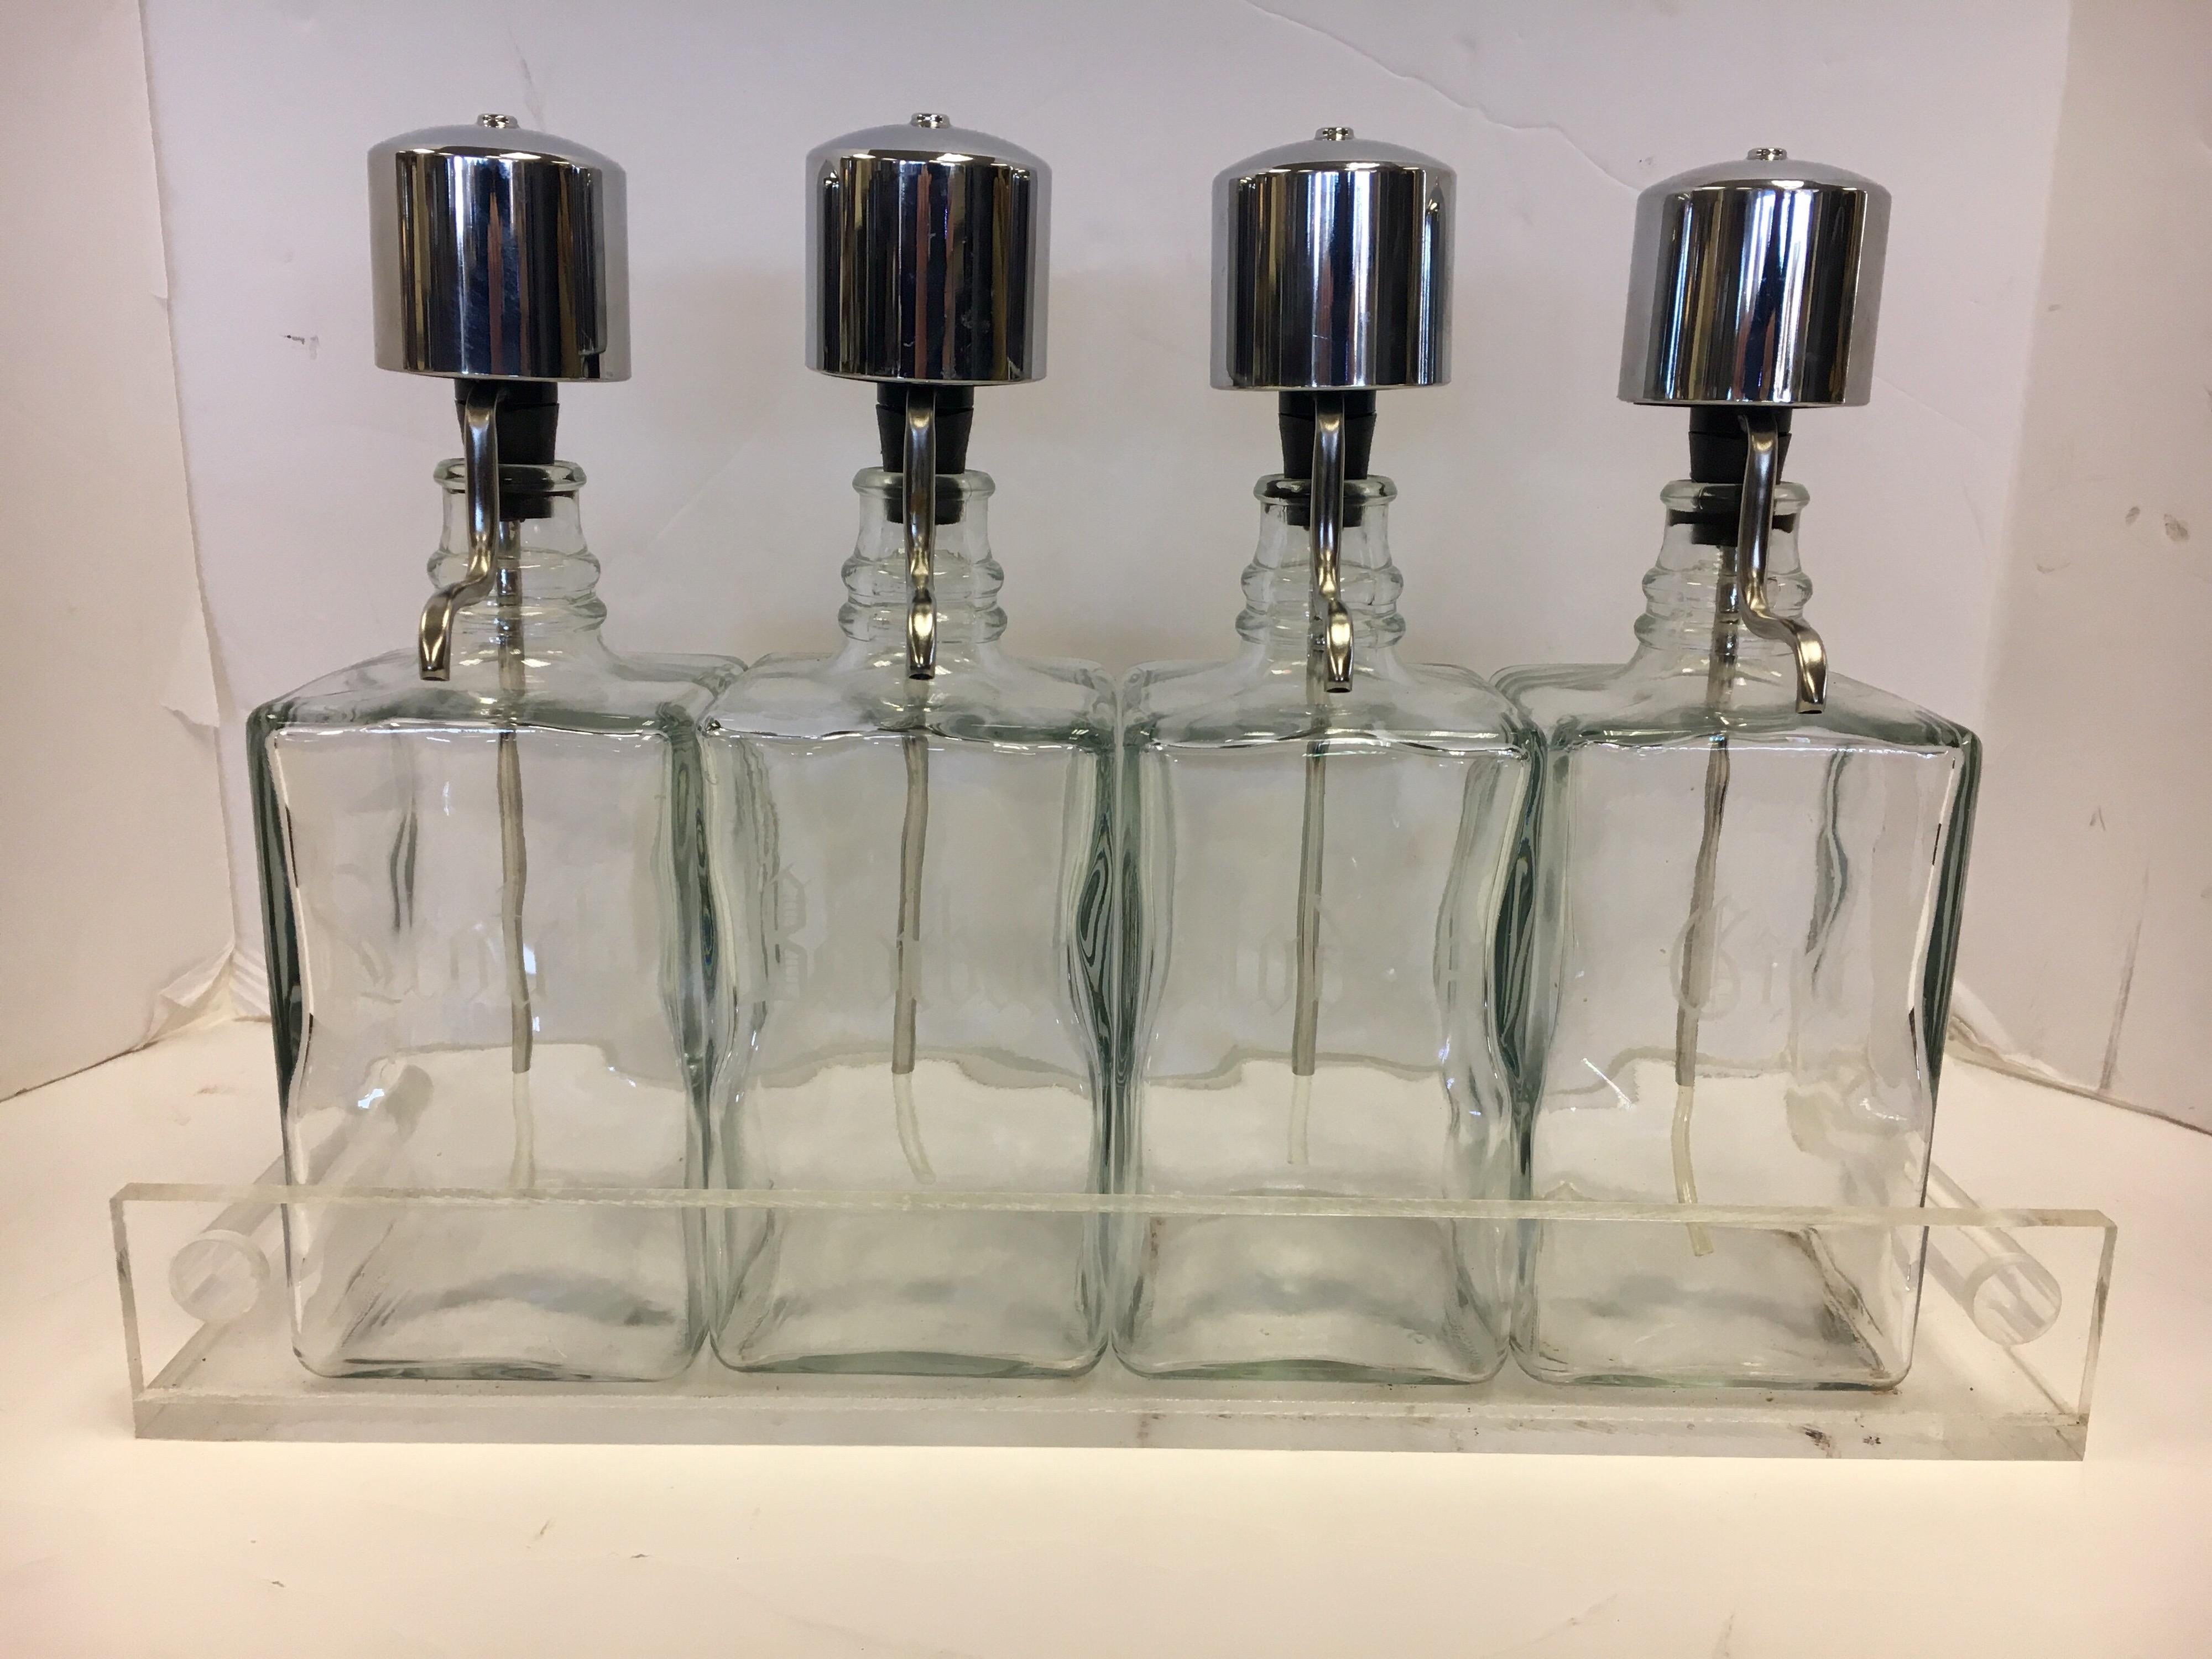 Rare midcentury barware with four decanters, each hallmarked either Scotch, Bourbon, Vodka or Gin and all with rare pump mechanism for the perfect pour. They are glass but sit in a Lucite tray which is magnificent.